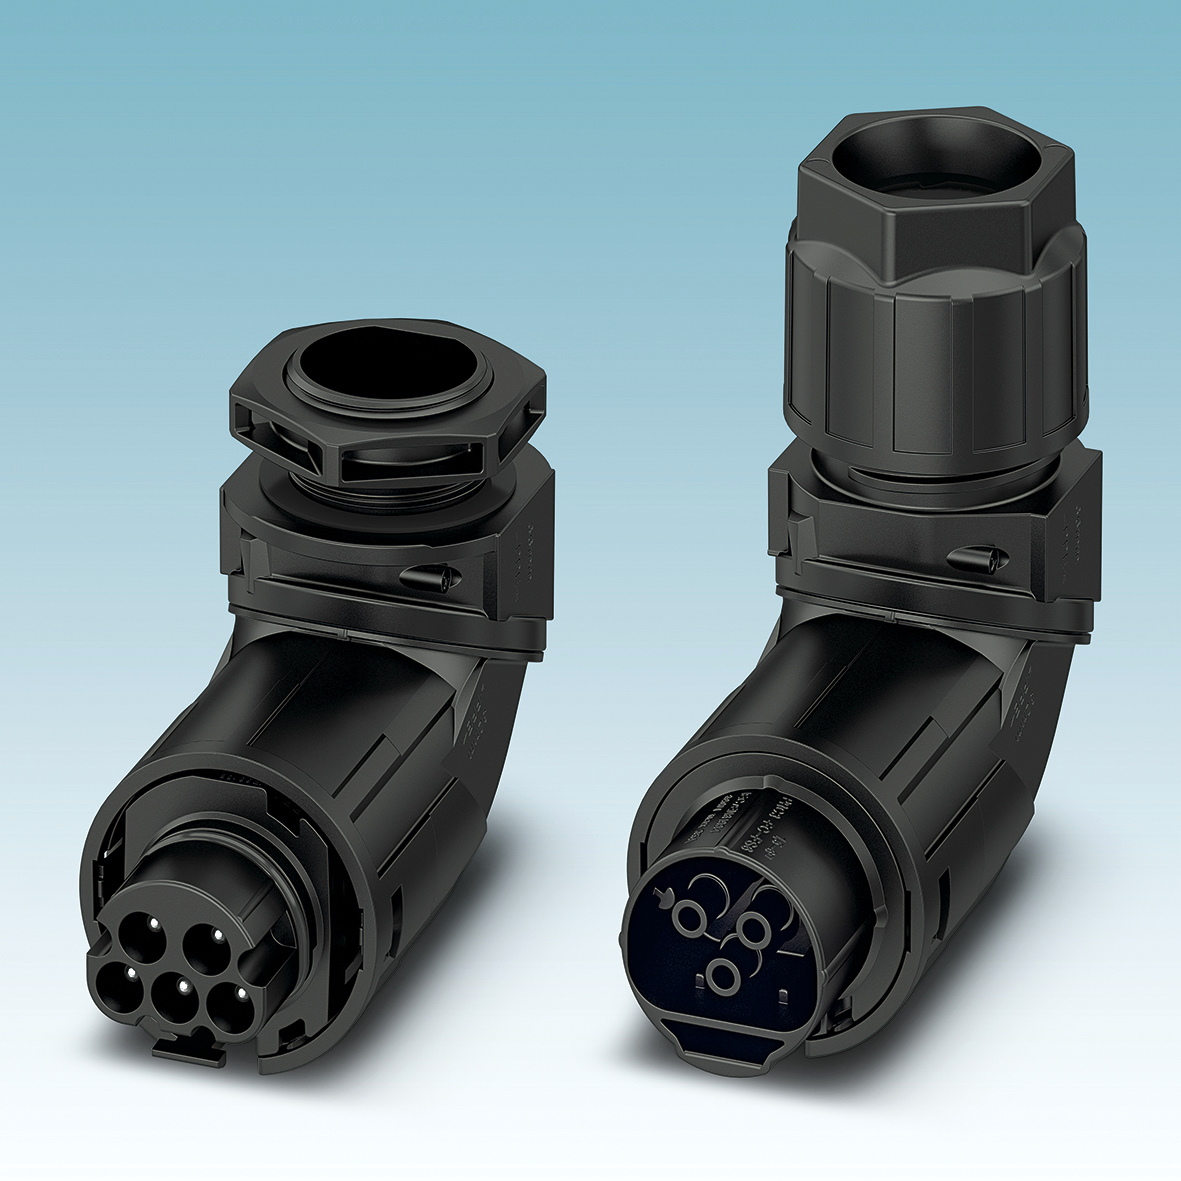 new connectivity products: July 2019, Phoenix Contact PRC Series Inverted Circular Connectors